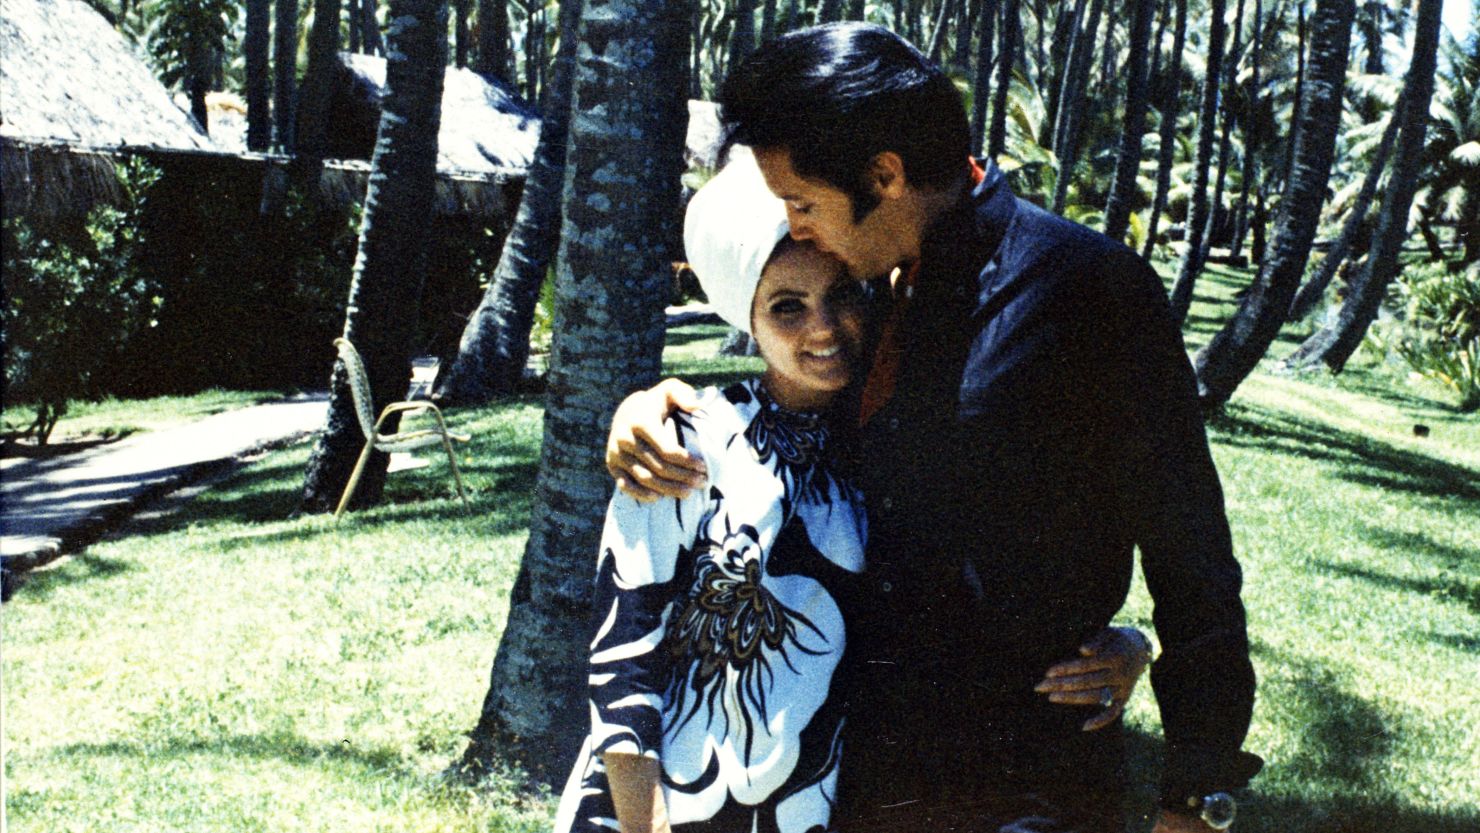 Priscilla and Elvis Presley were married from 1967 - 1973.